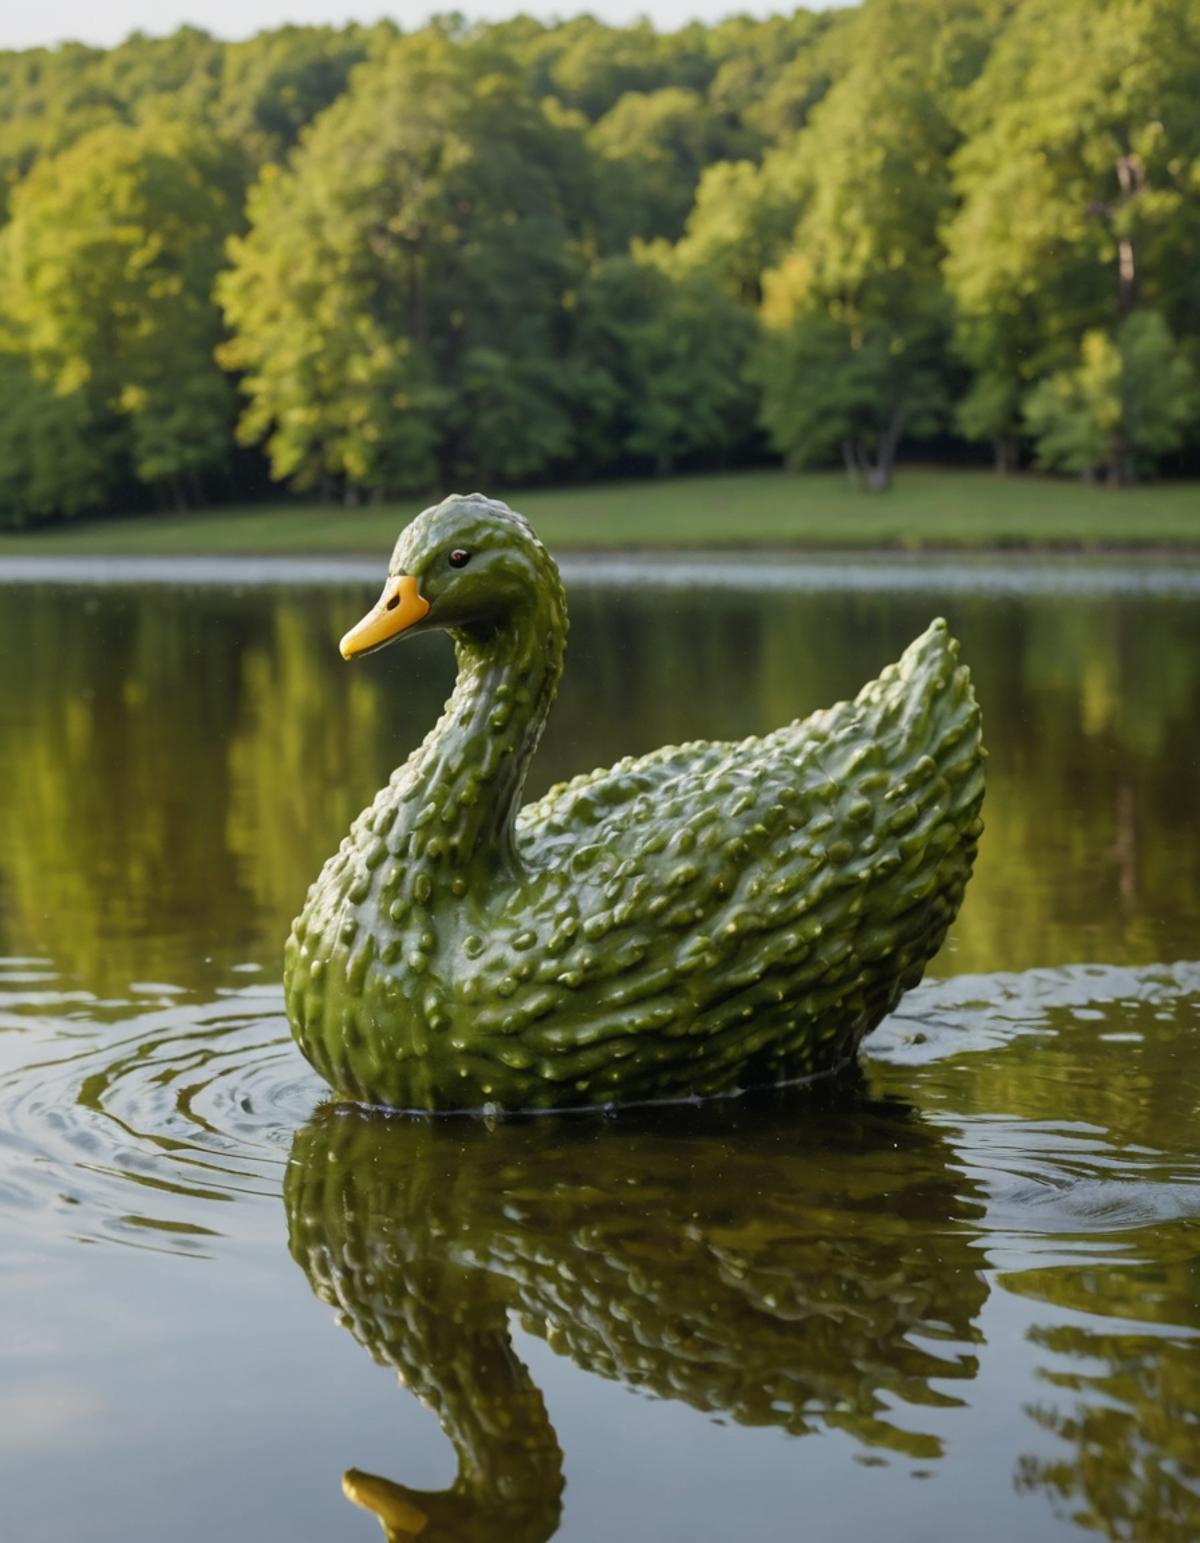 A green rubber duck sitting in a lake.